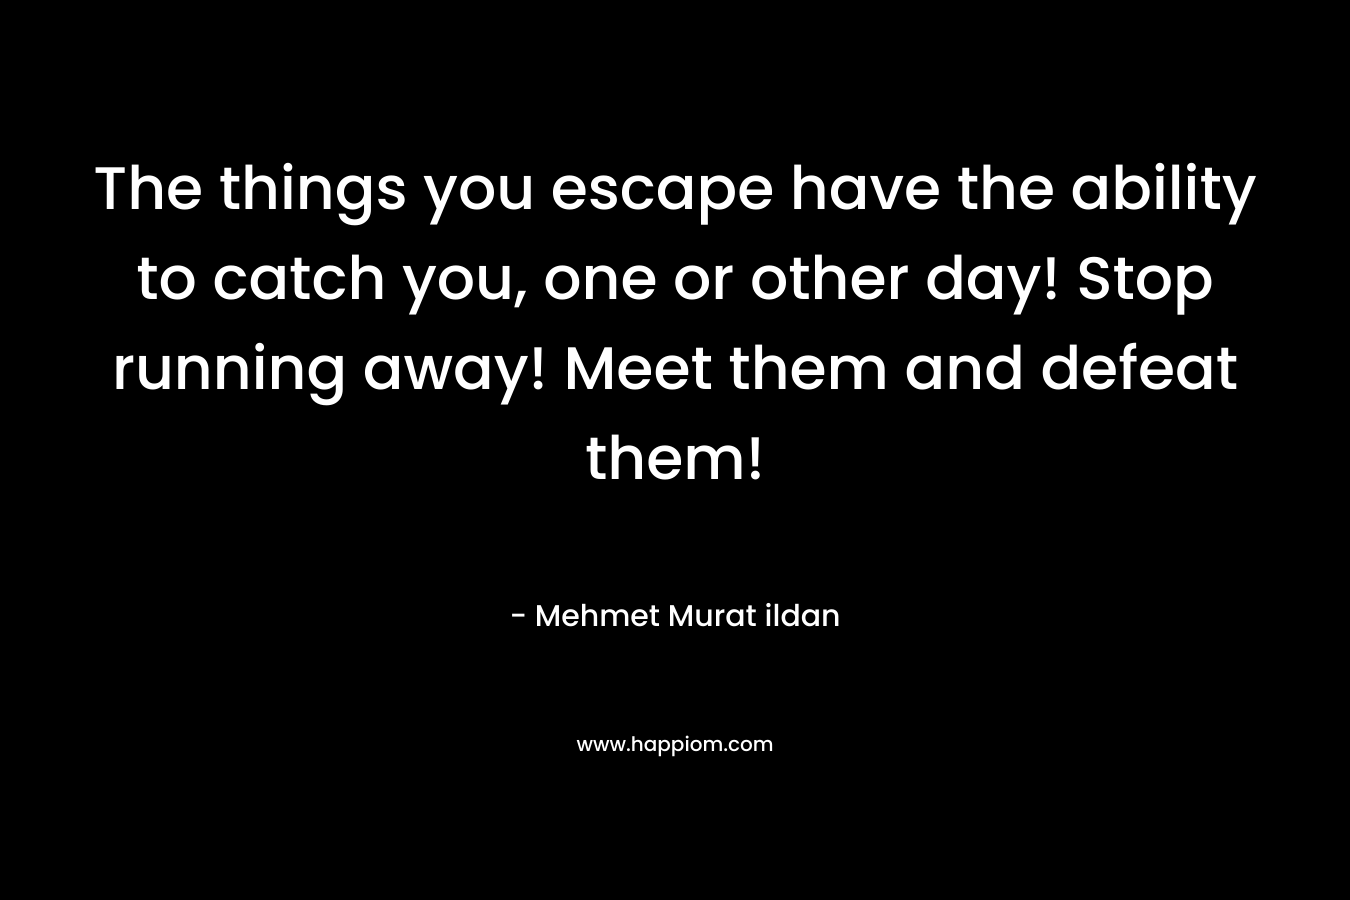 The things you escape have the ability to catch you, one or other day! Stop running away! Meet them and defeat them!